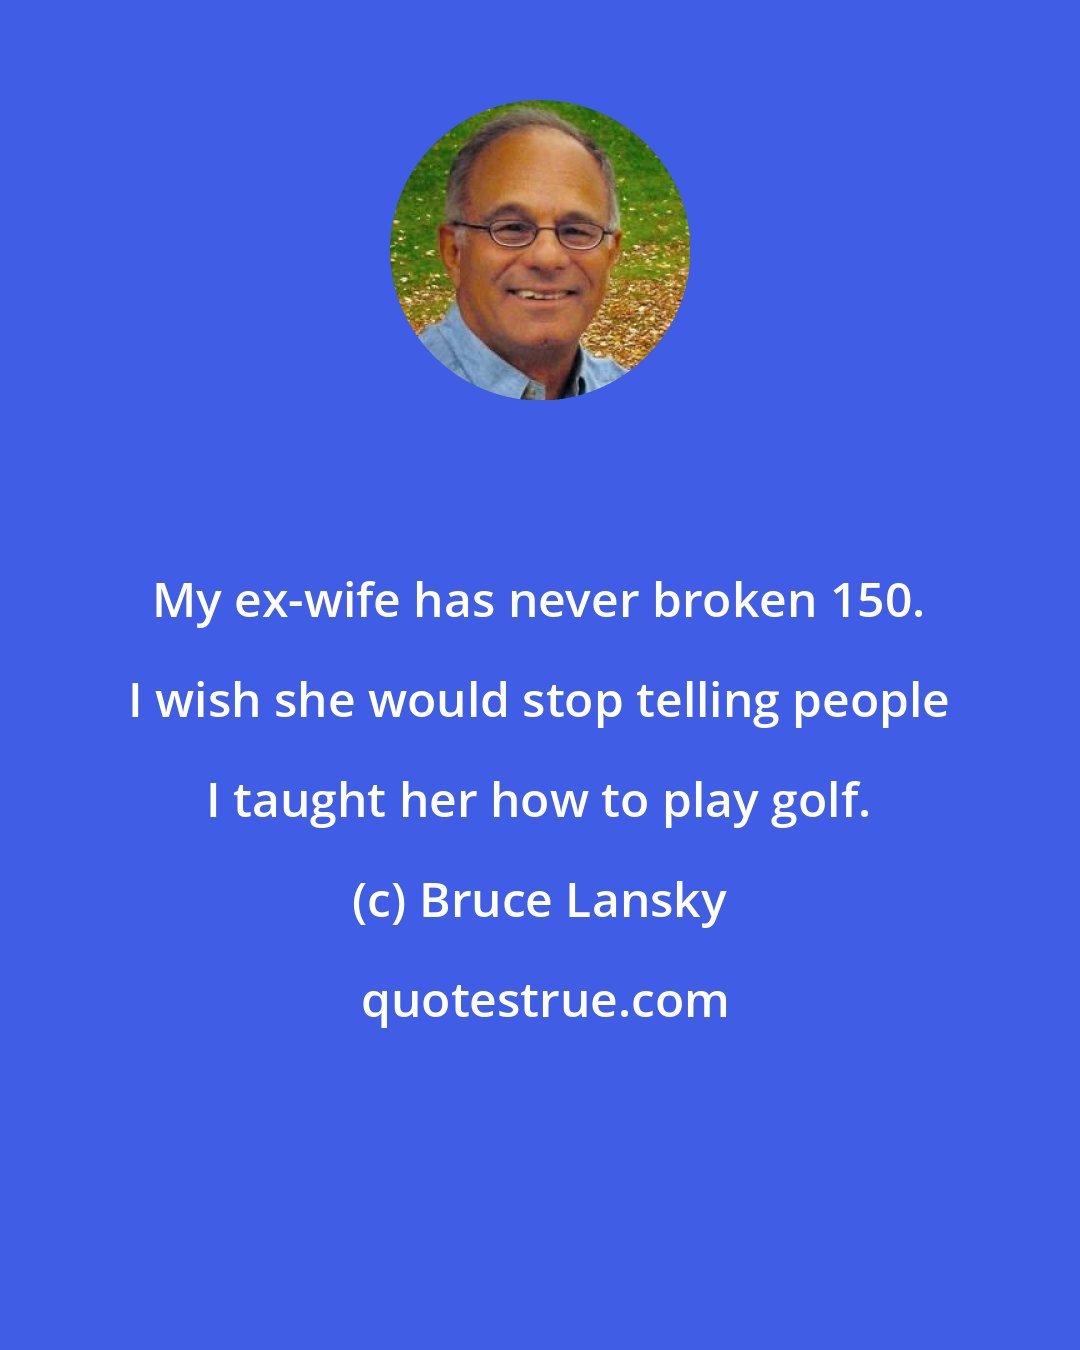 Bruce Lansky: My ex-wife has never broken 150. I wish she would stop telling people I taught her how to play golf.